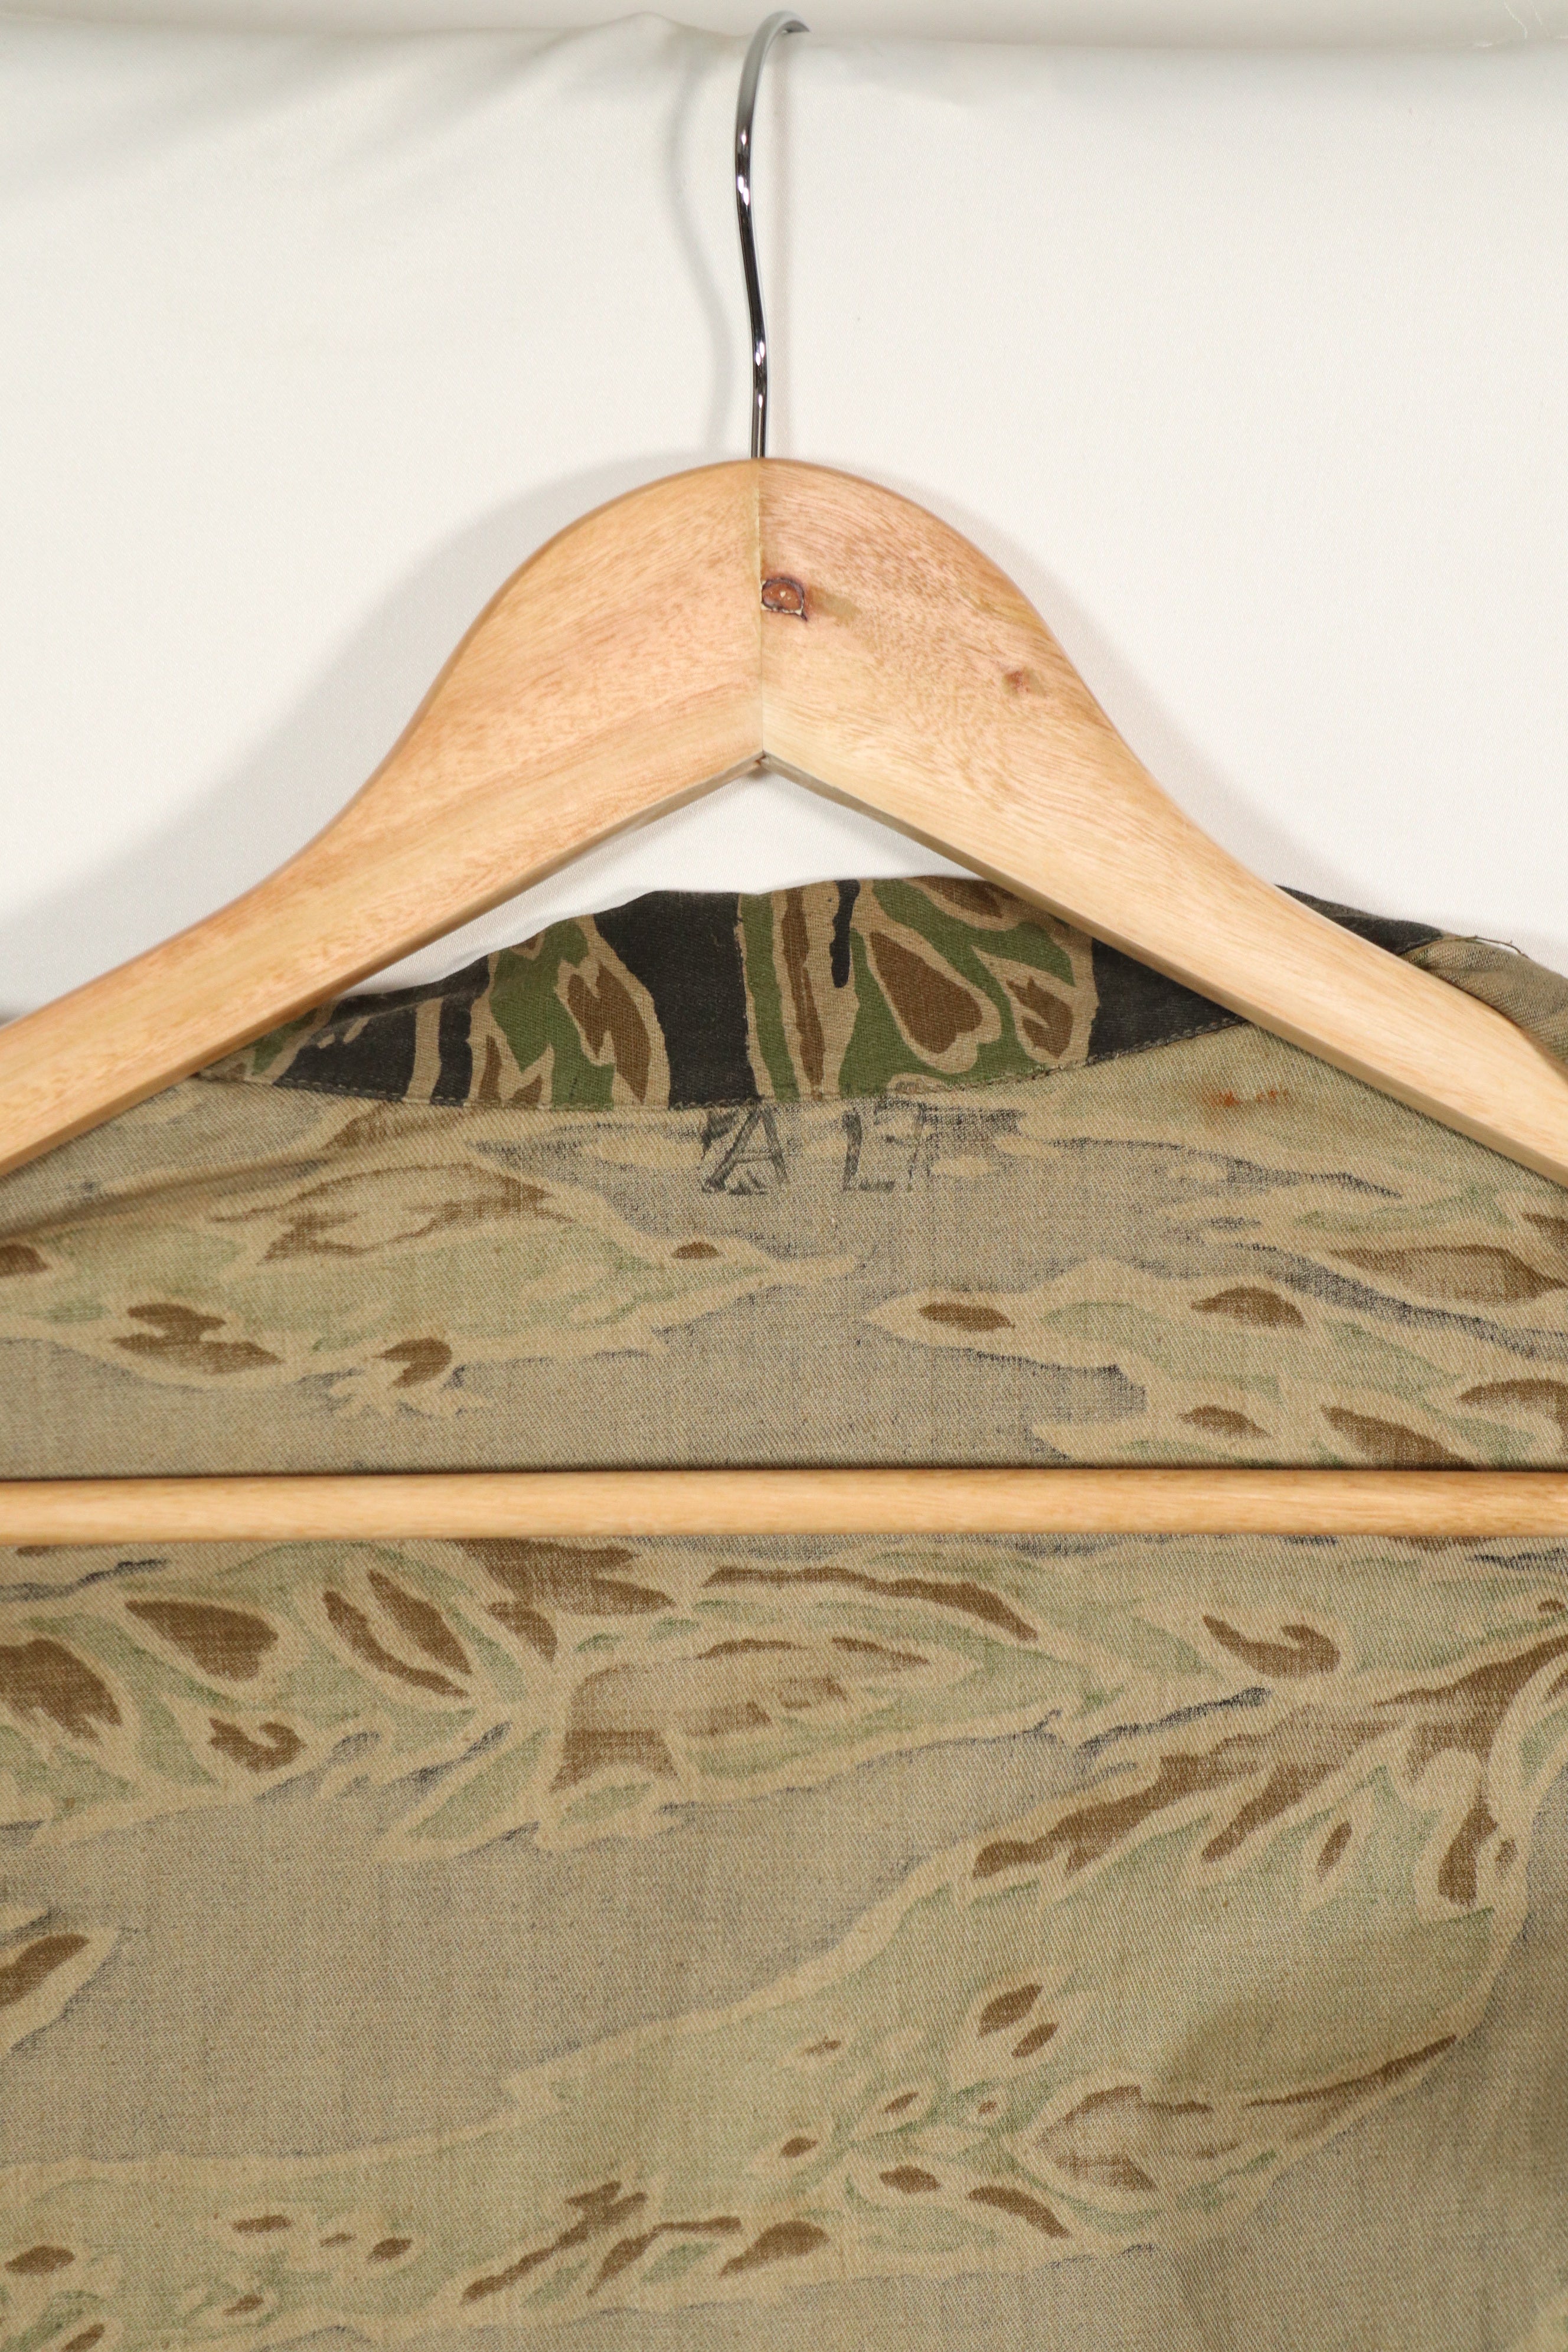 Real Late War Pattern Tiger Stripe Shirt, almost unused, size A-L.